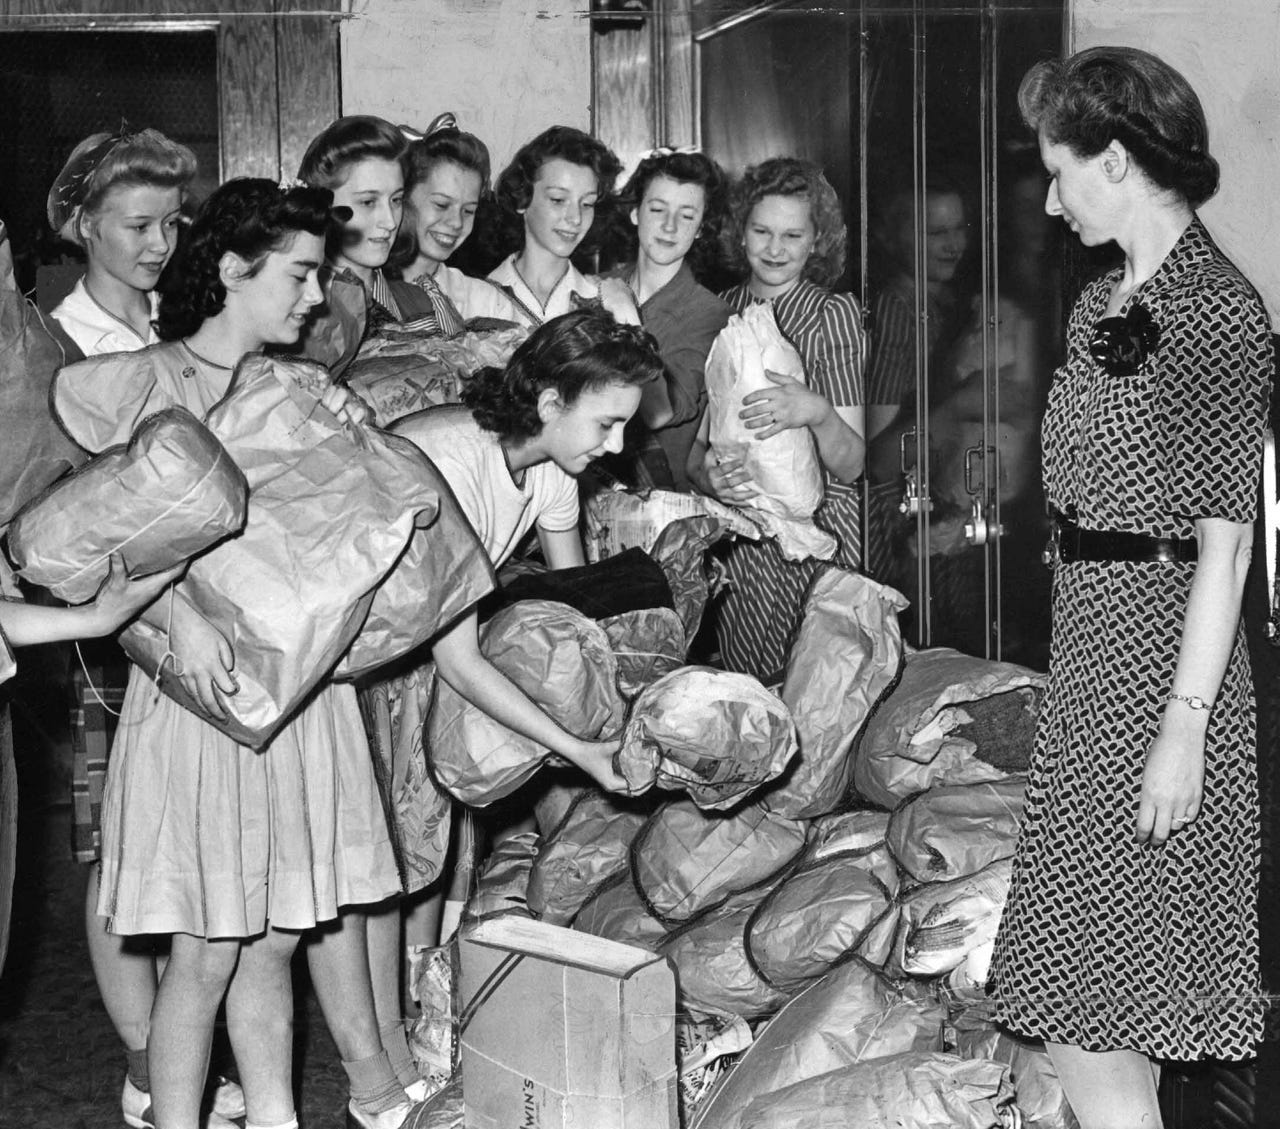 Students from the Andrew Jackson School in Detroit pile up their salvage efforts for clothing, rubber, iron and paper for the war effort in May 1942.